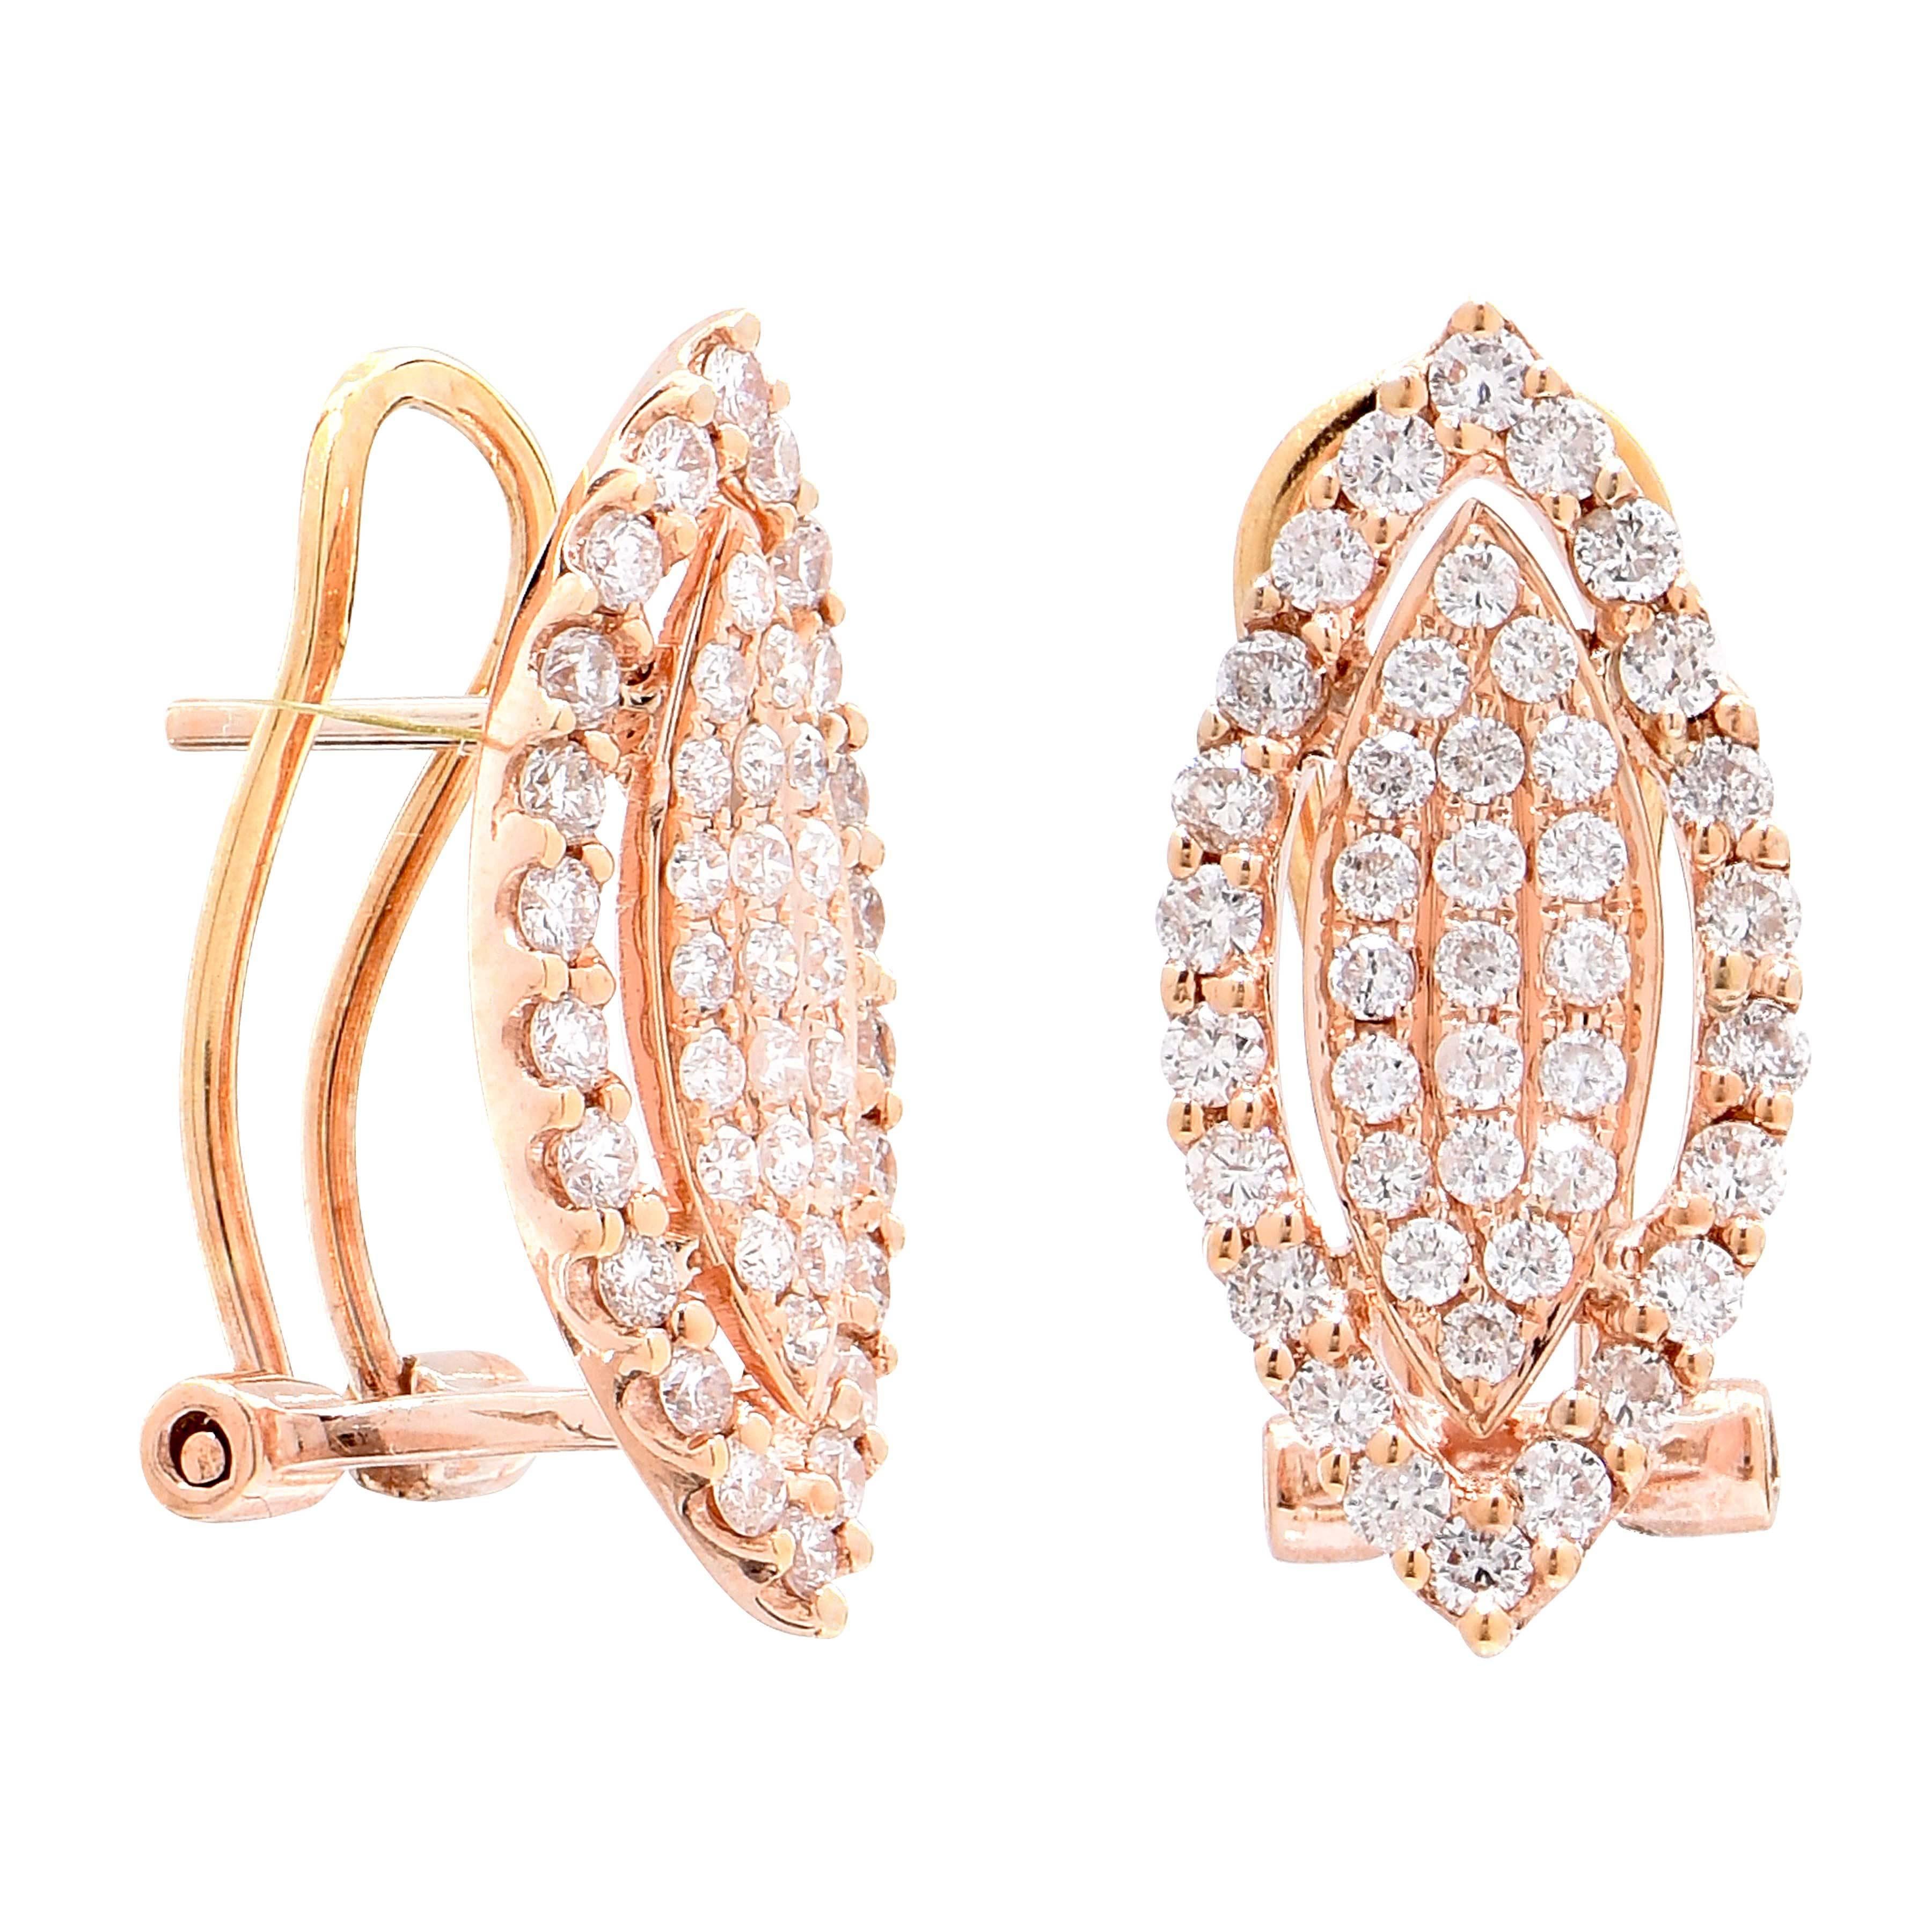 Marquise shape diamond ear clips featuring 86 round cut diamonds with an estimated total weight of 1 carat.

Metal Type: 18 Karat Rose Gold (tested and or stamped)
Metal Weight: 4.8 Grams